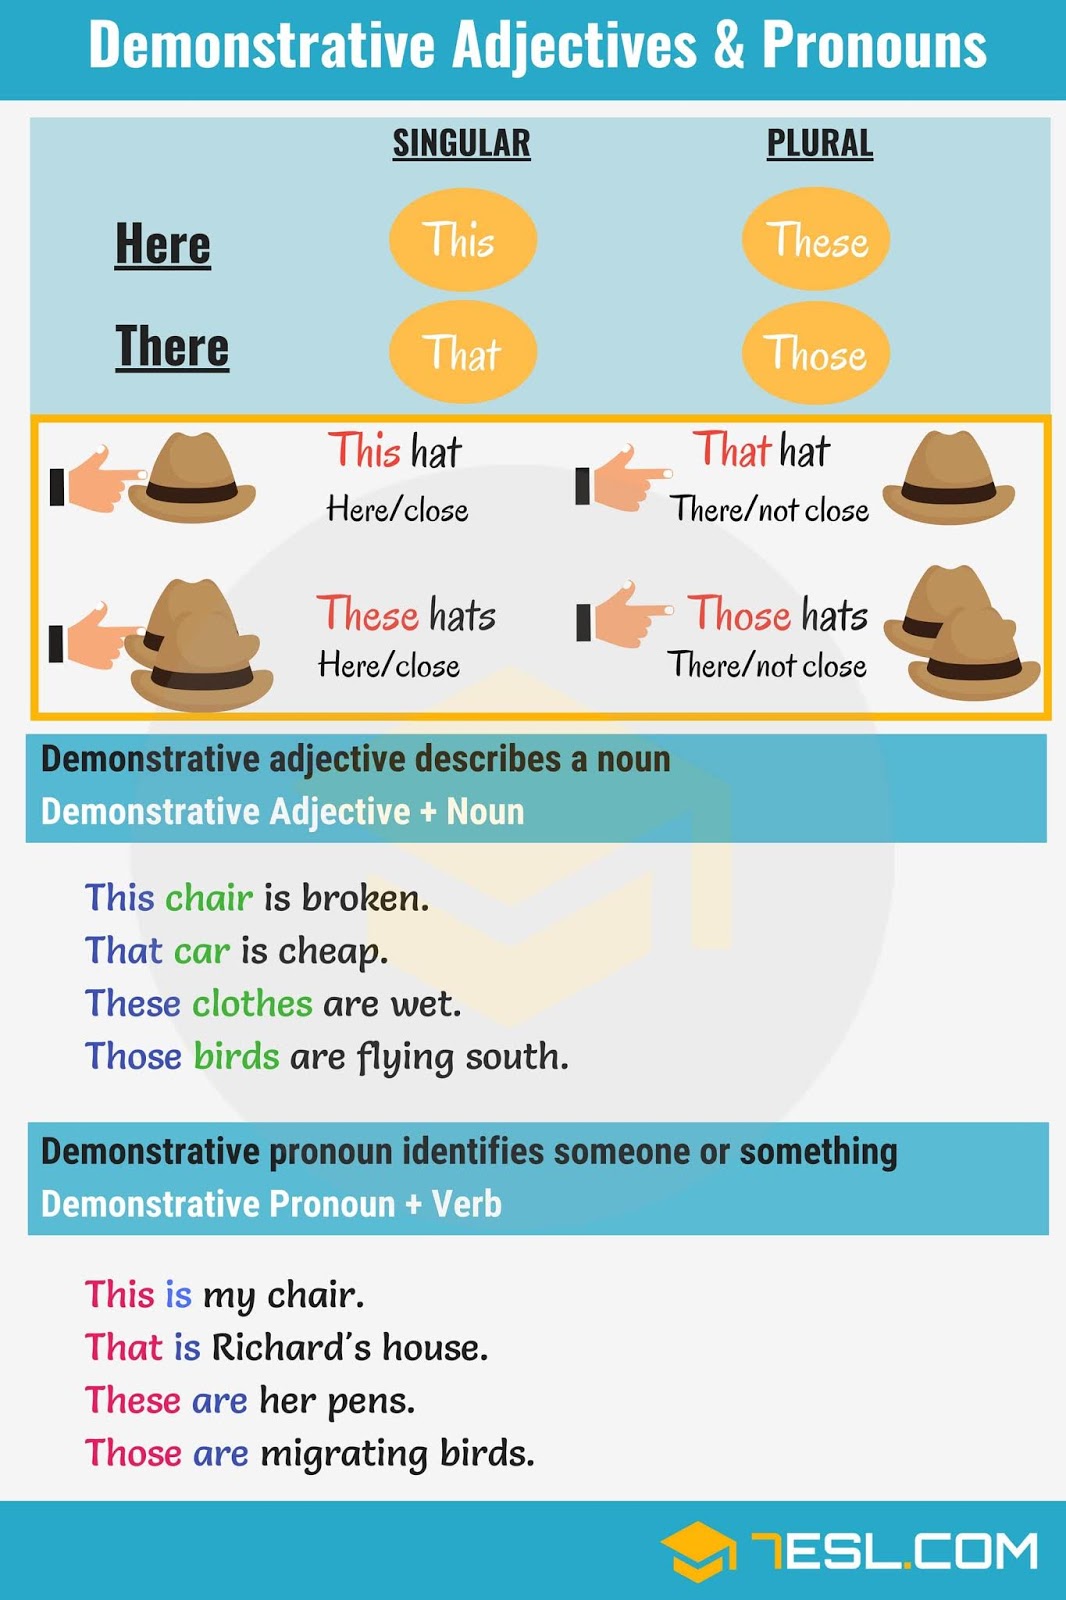 english-is-funtastic-demonstrative-adjectives-and-pronouns-infographic